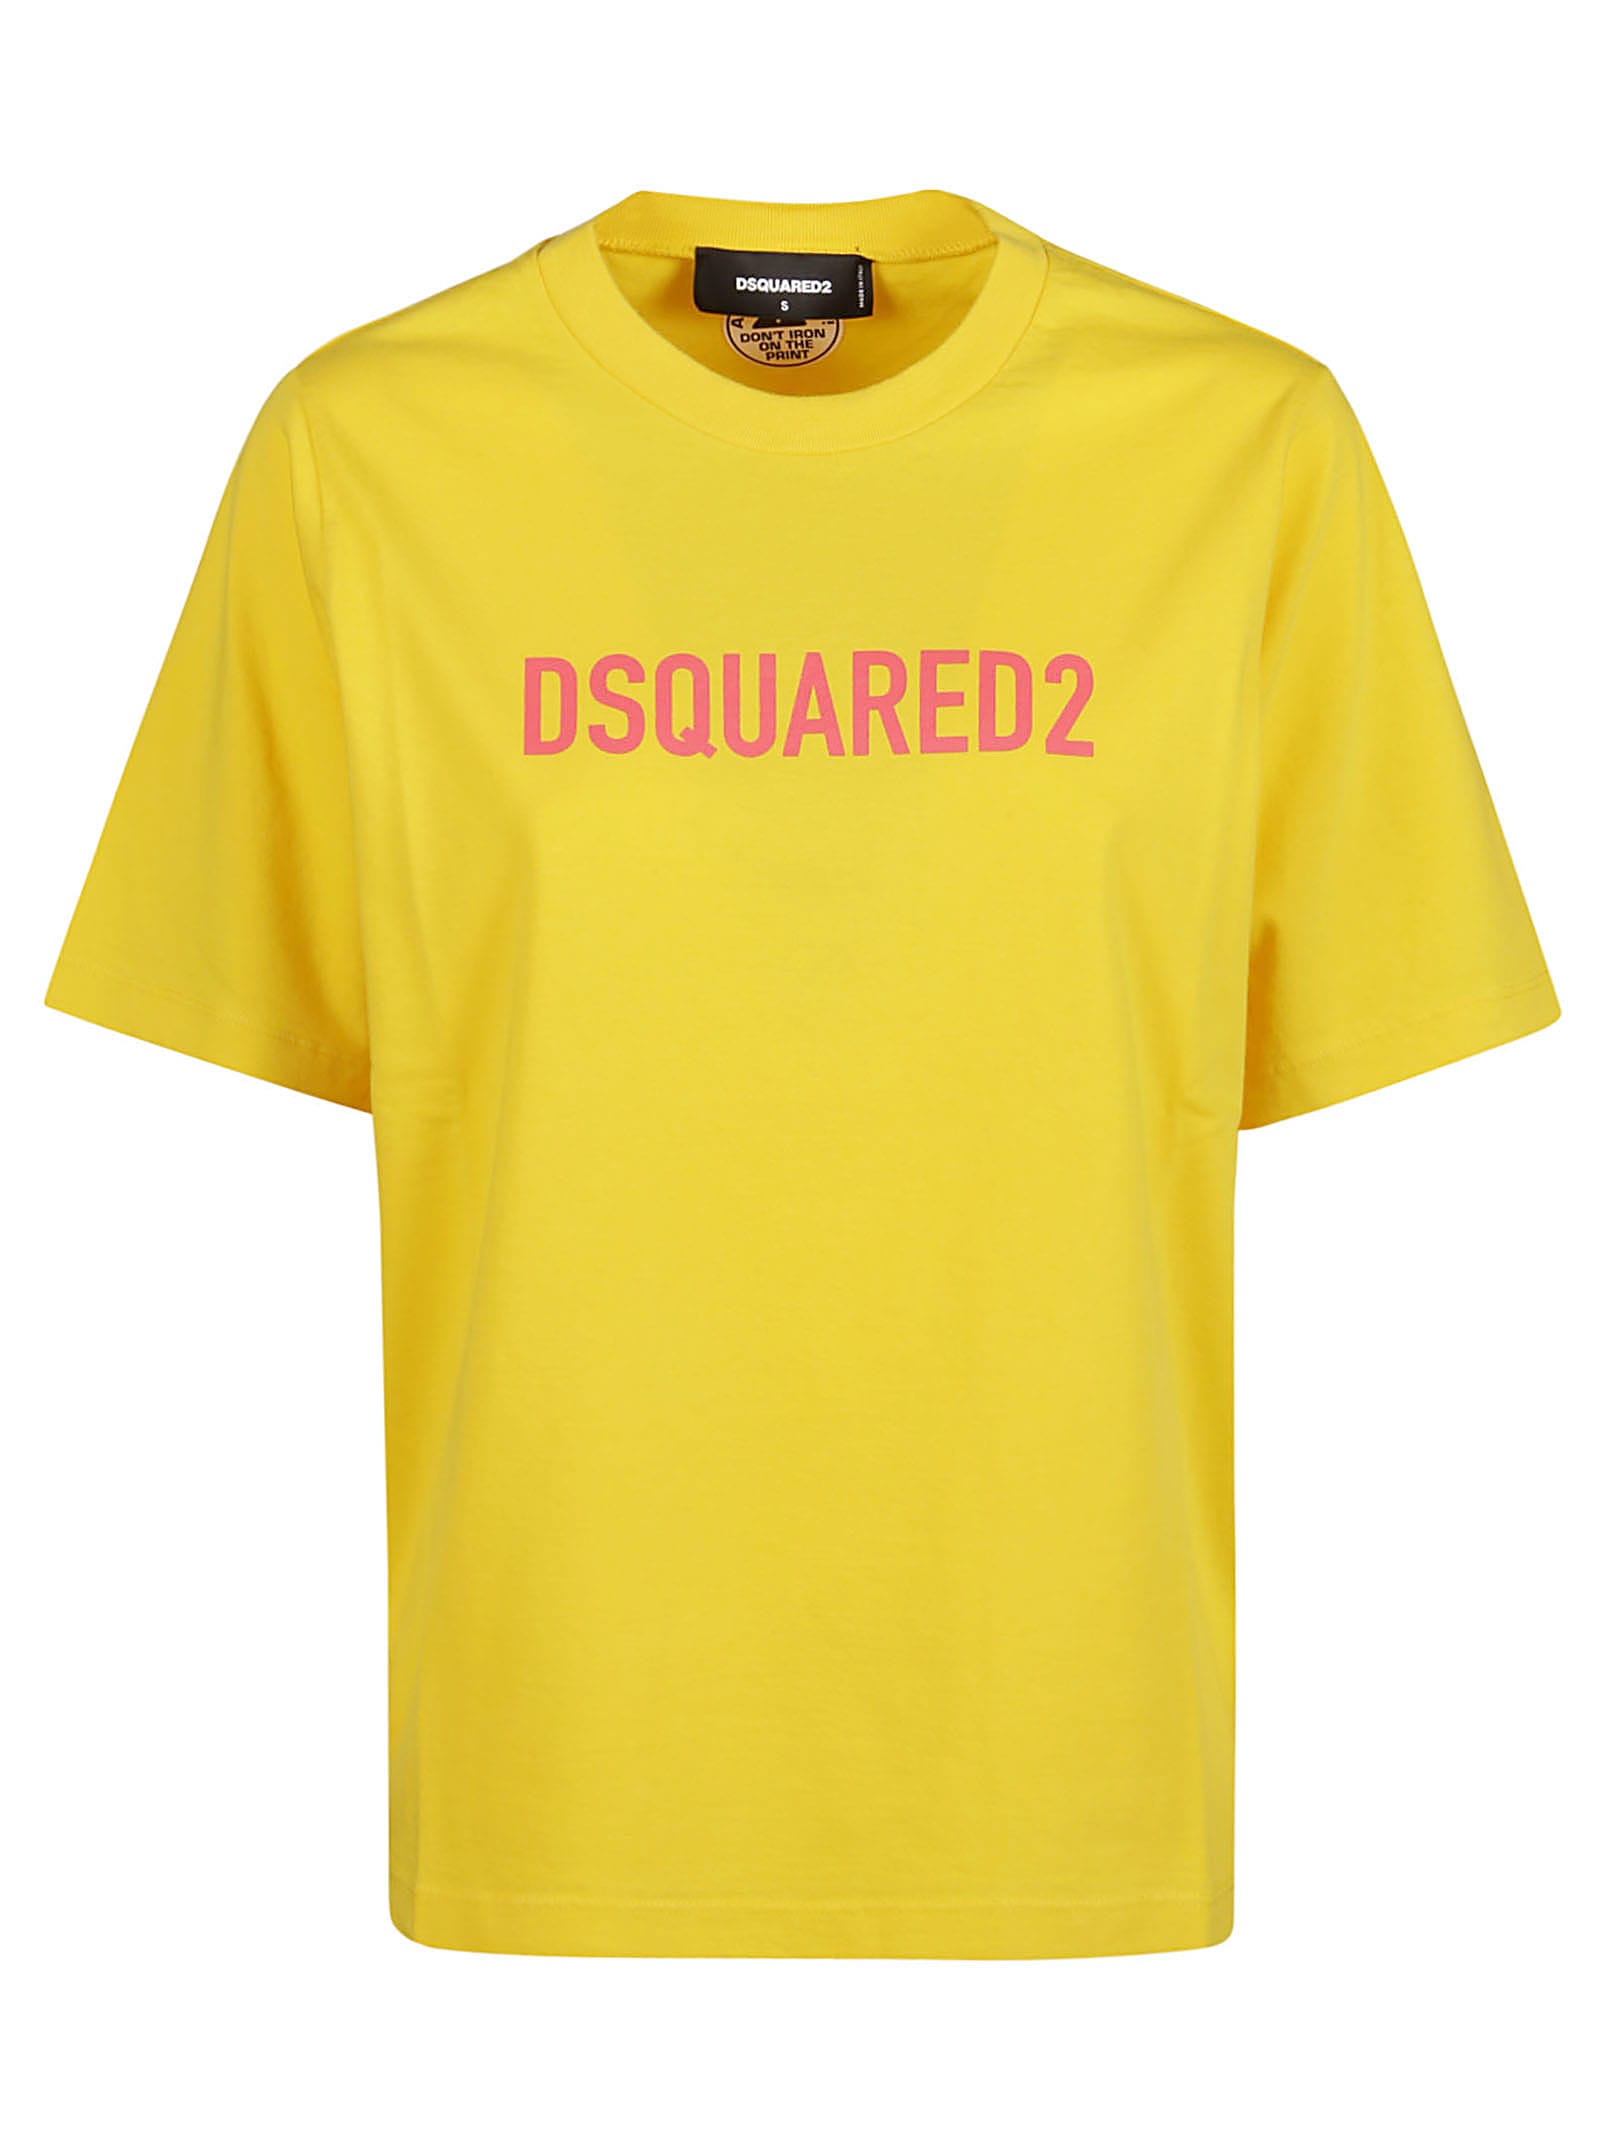 DSQUARED2 EASY T-SHIRT